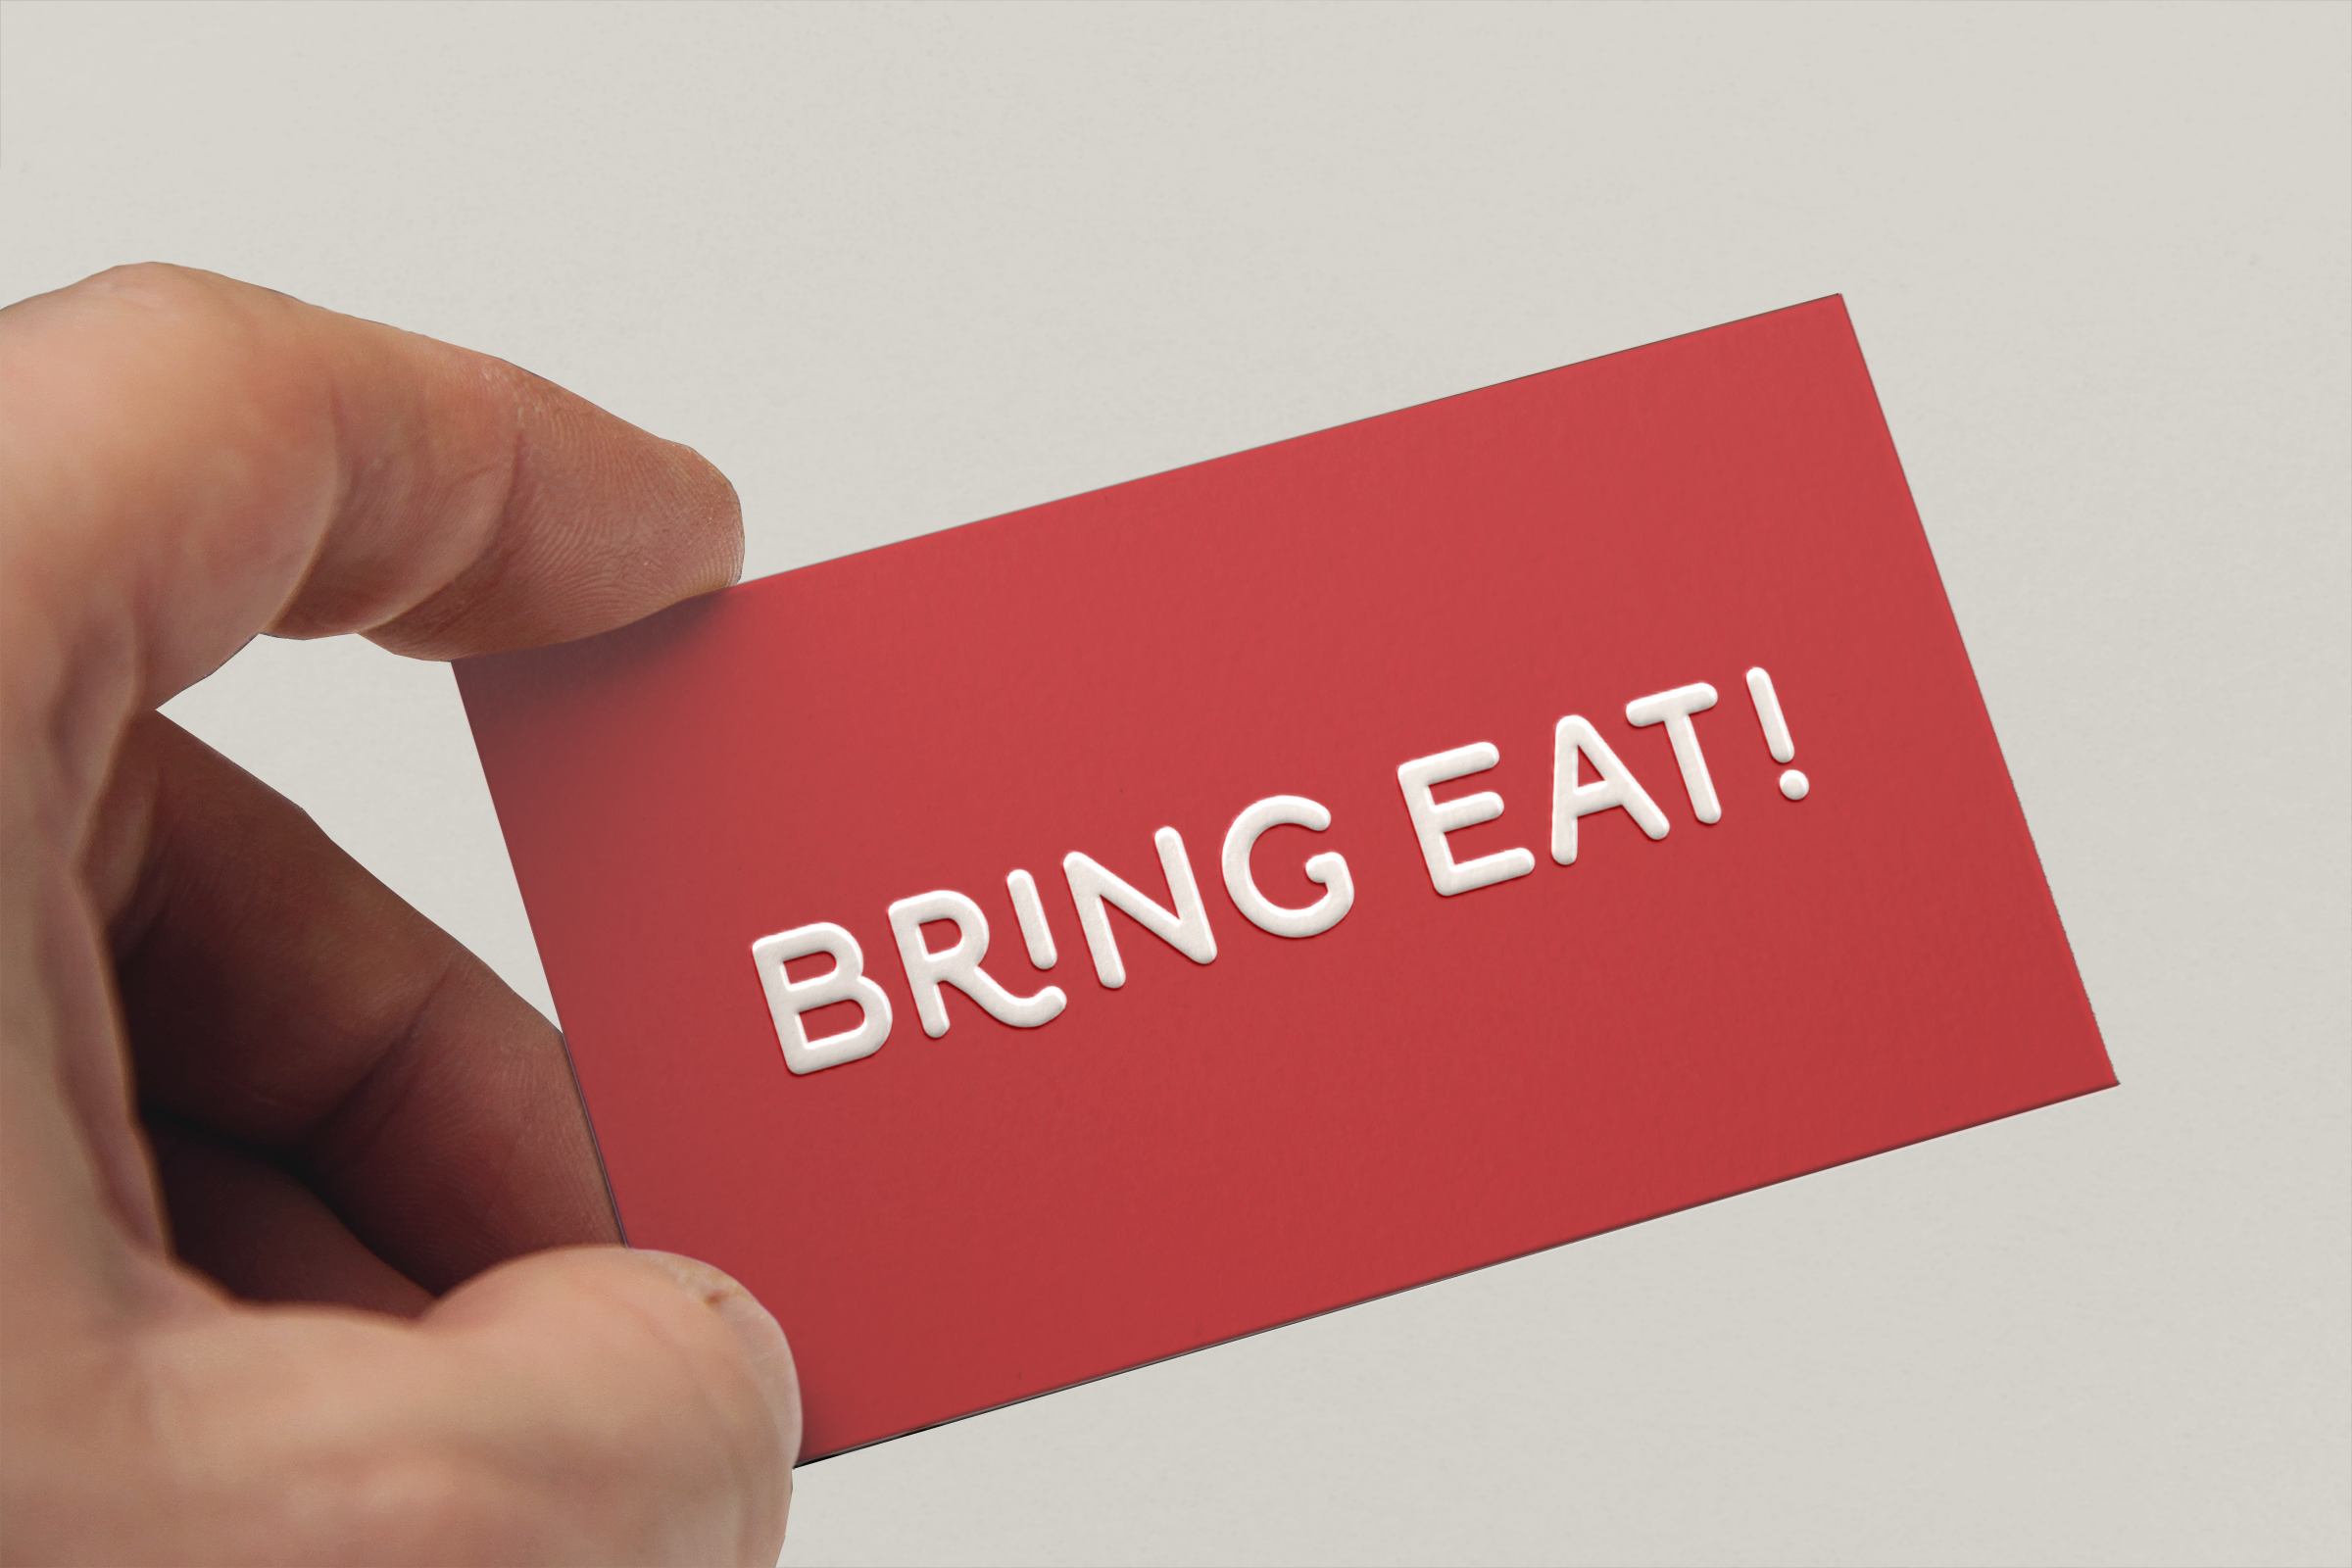 Bring Eat business_card